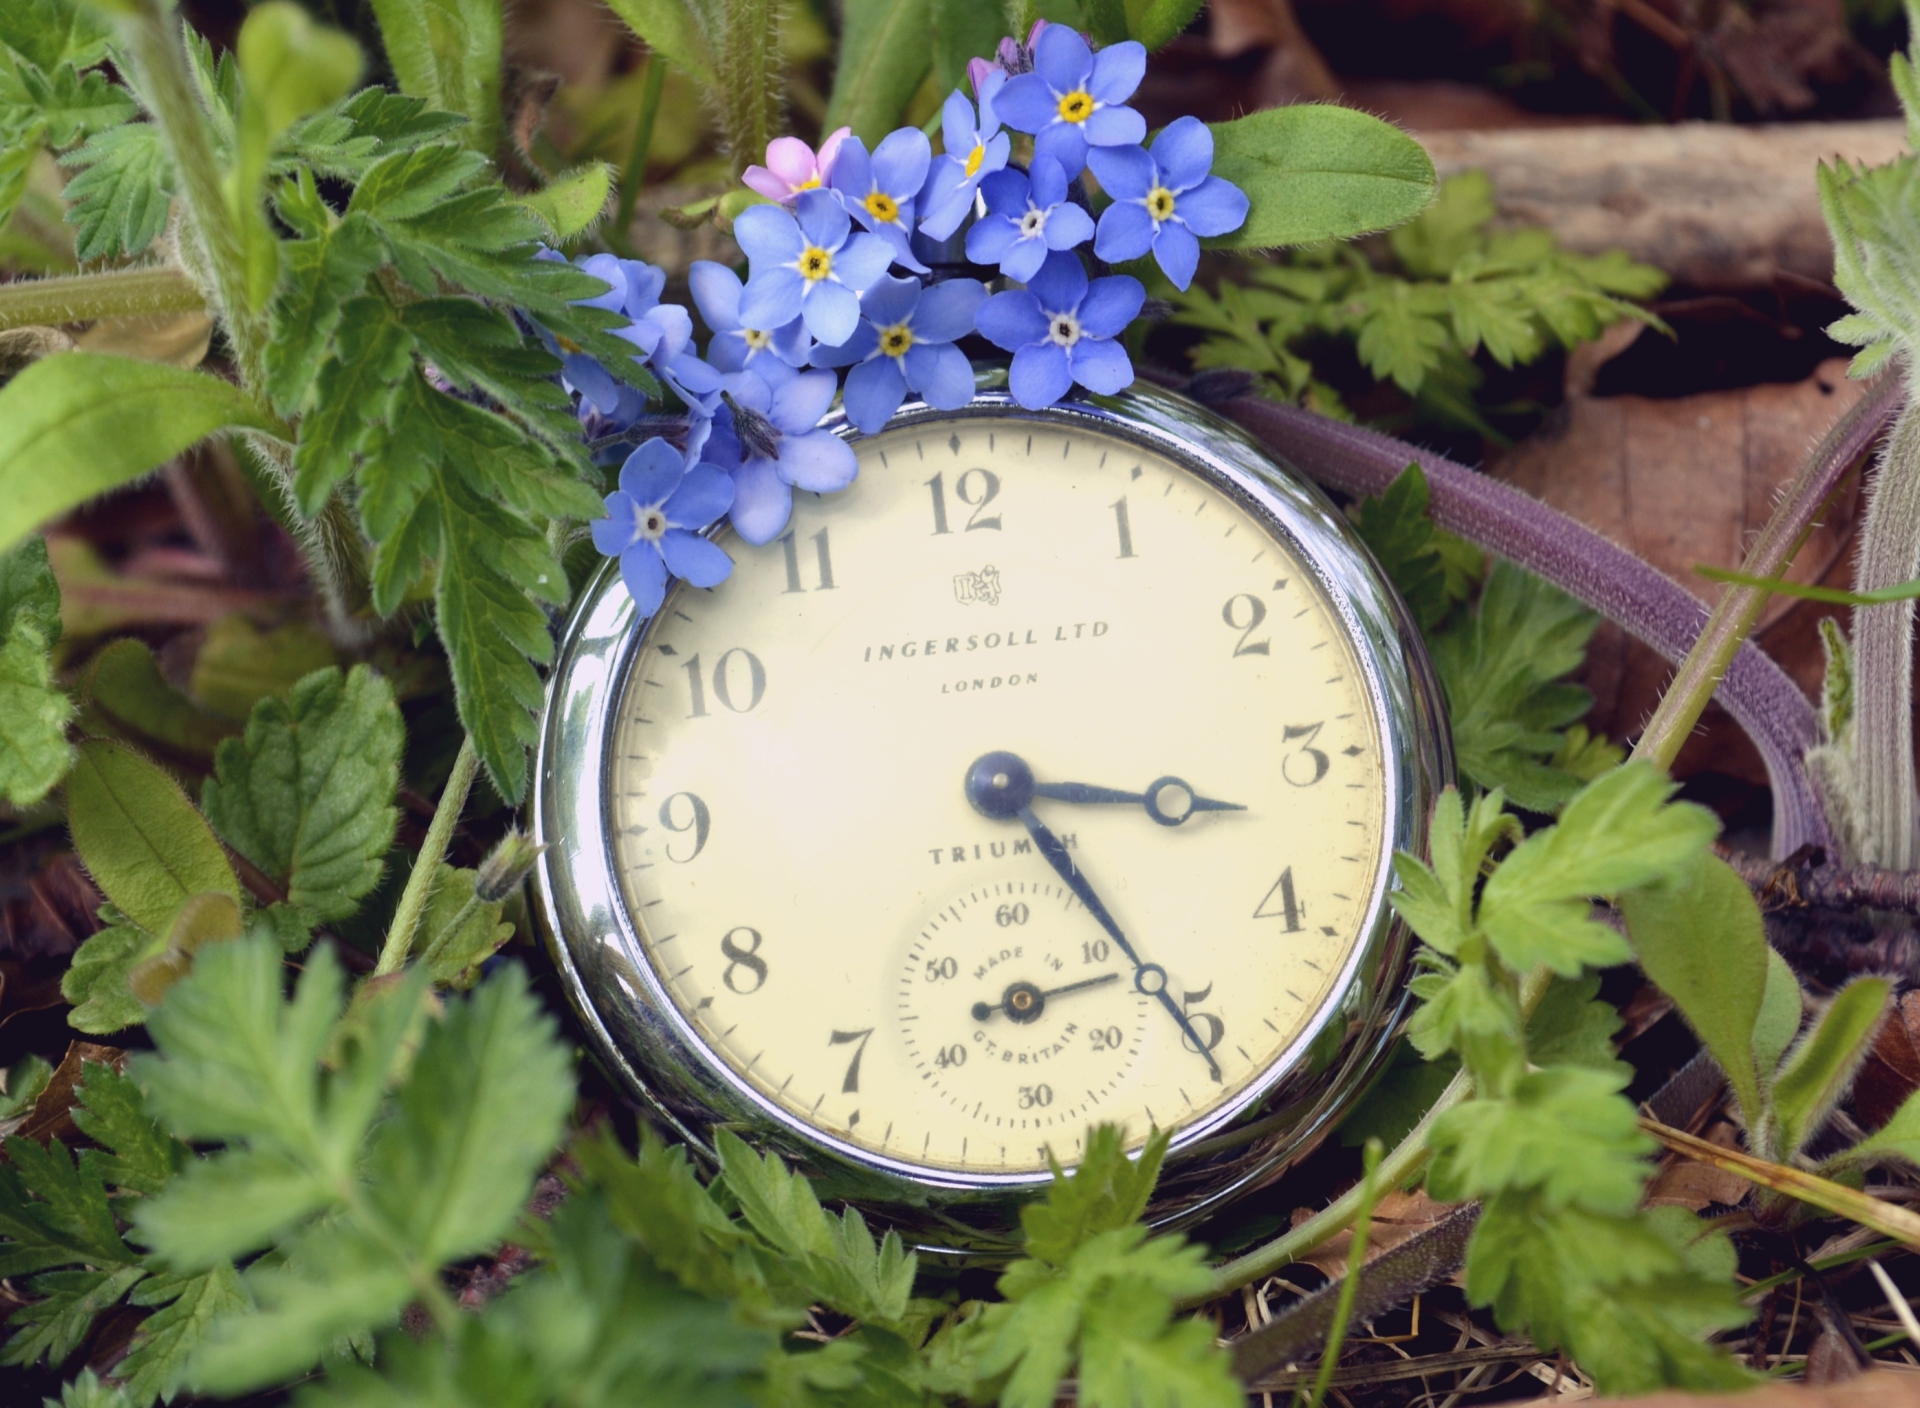 Vintage Watch And Little Blue Flowers wallpaper 1920x1408